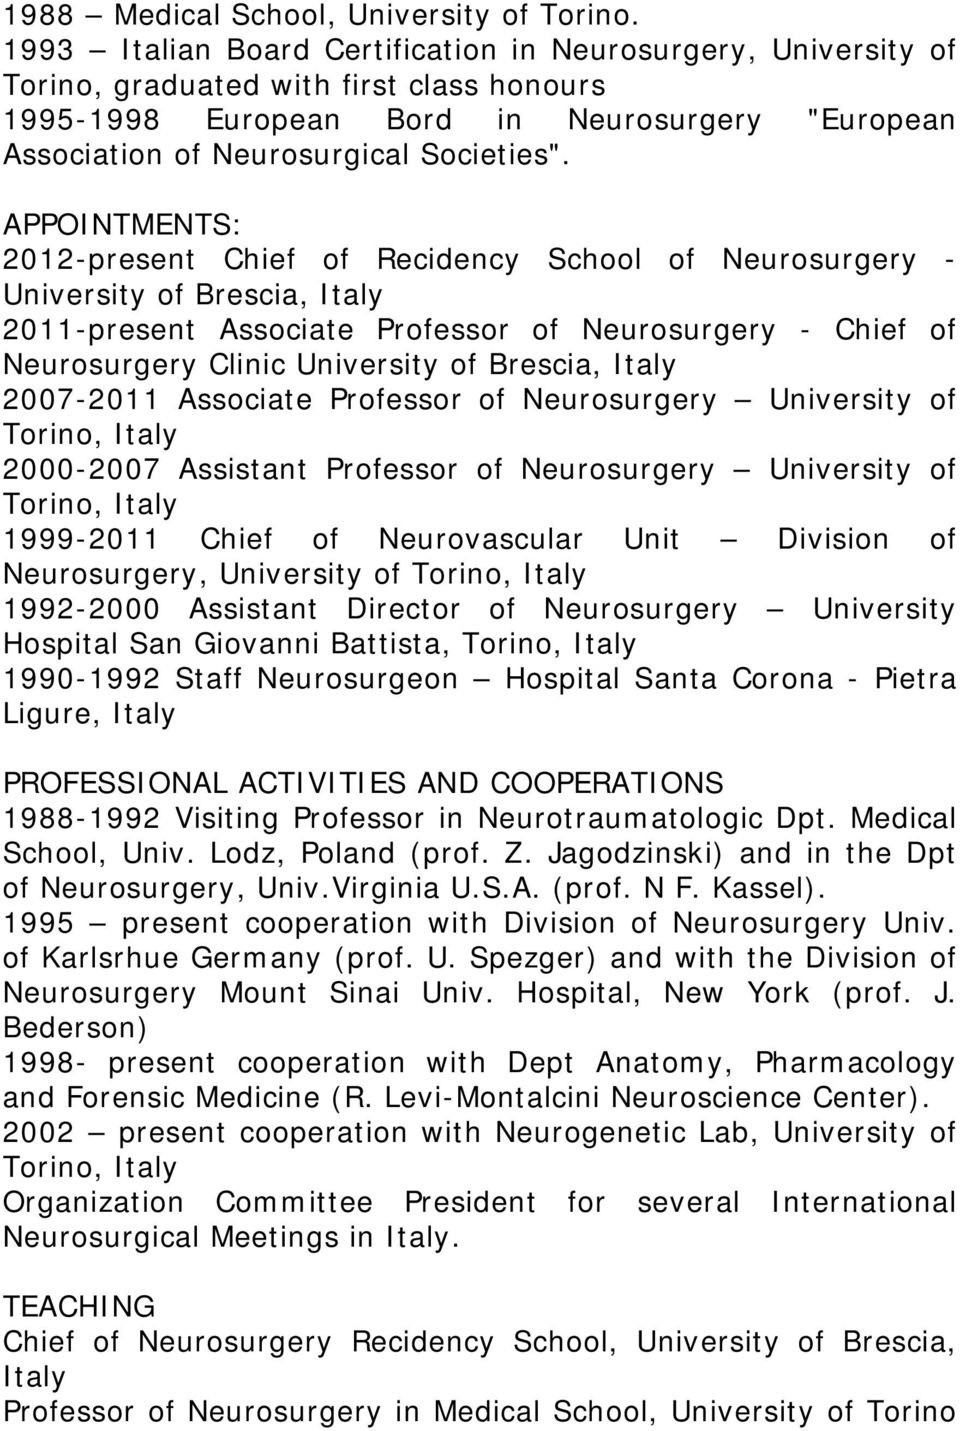 APPOINTMENTS: 2012-present Chief of Recidency School of Neurosurgery - University of Brescia, Italy 2011-present Associate Professor of Neurosurgery - Chief of Neurosurgery Clinic University of